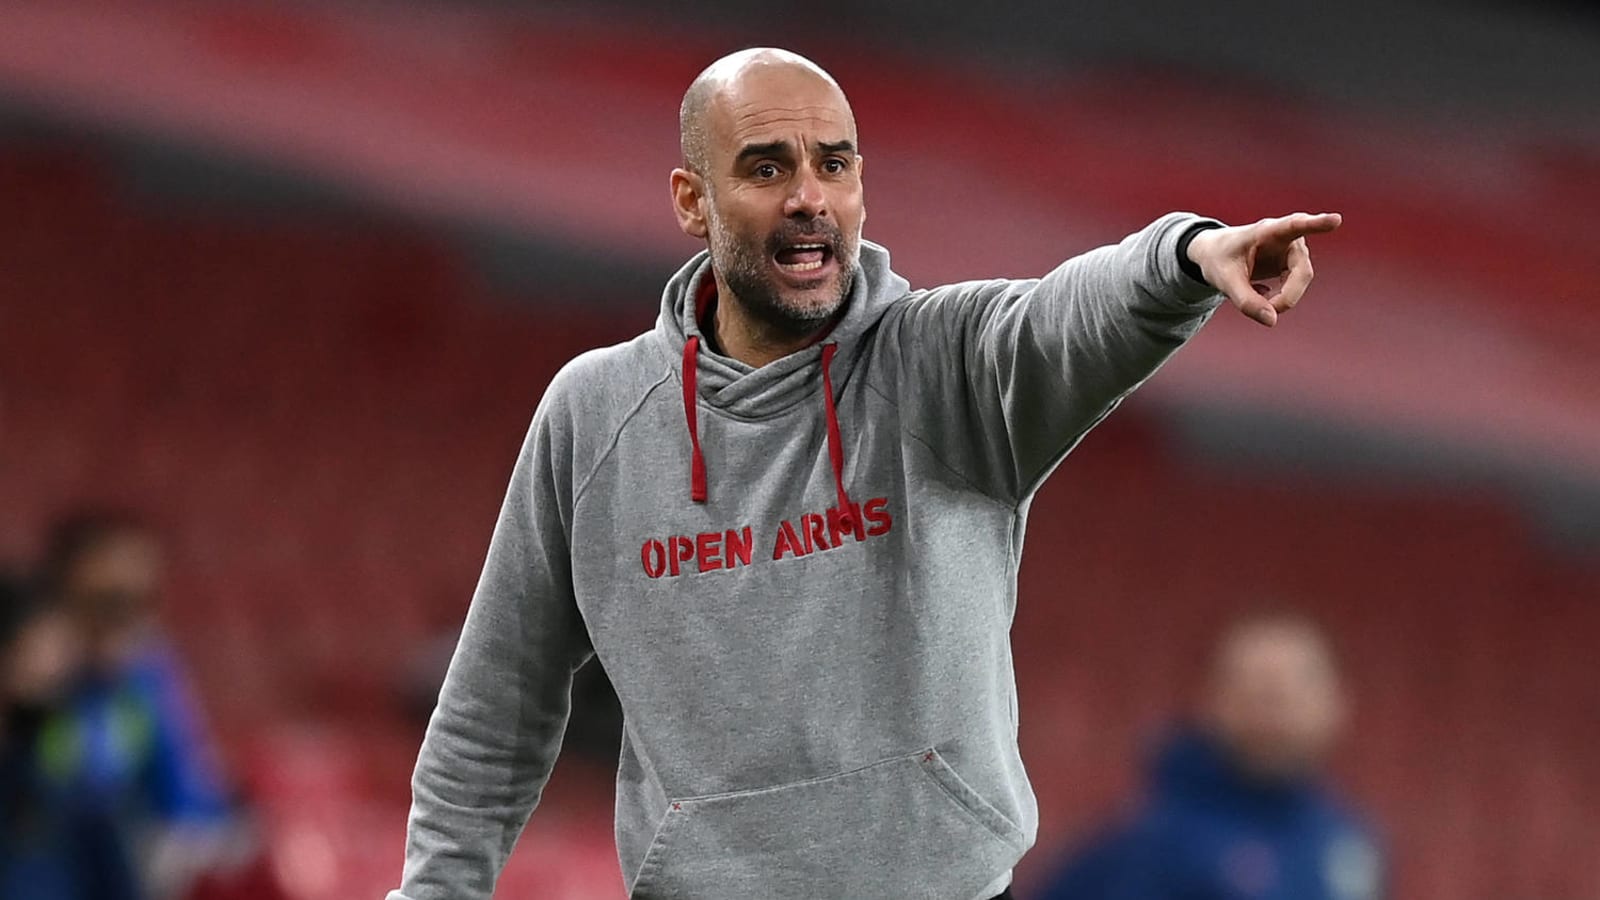 Manchester City's Pep Guardiola says he'll sit players already celebrating league title